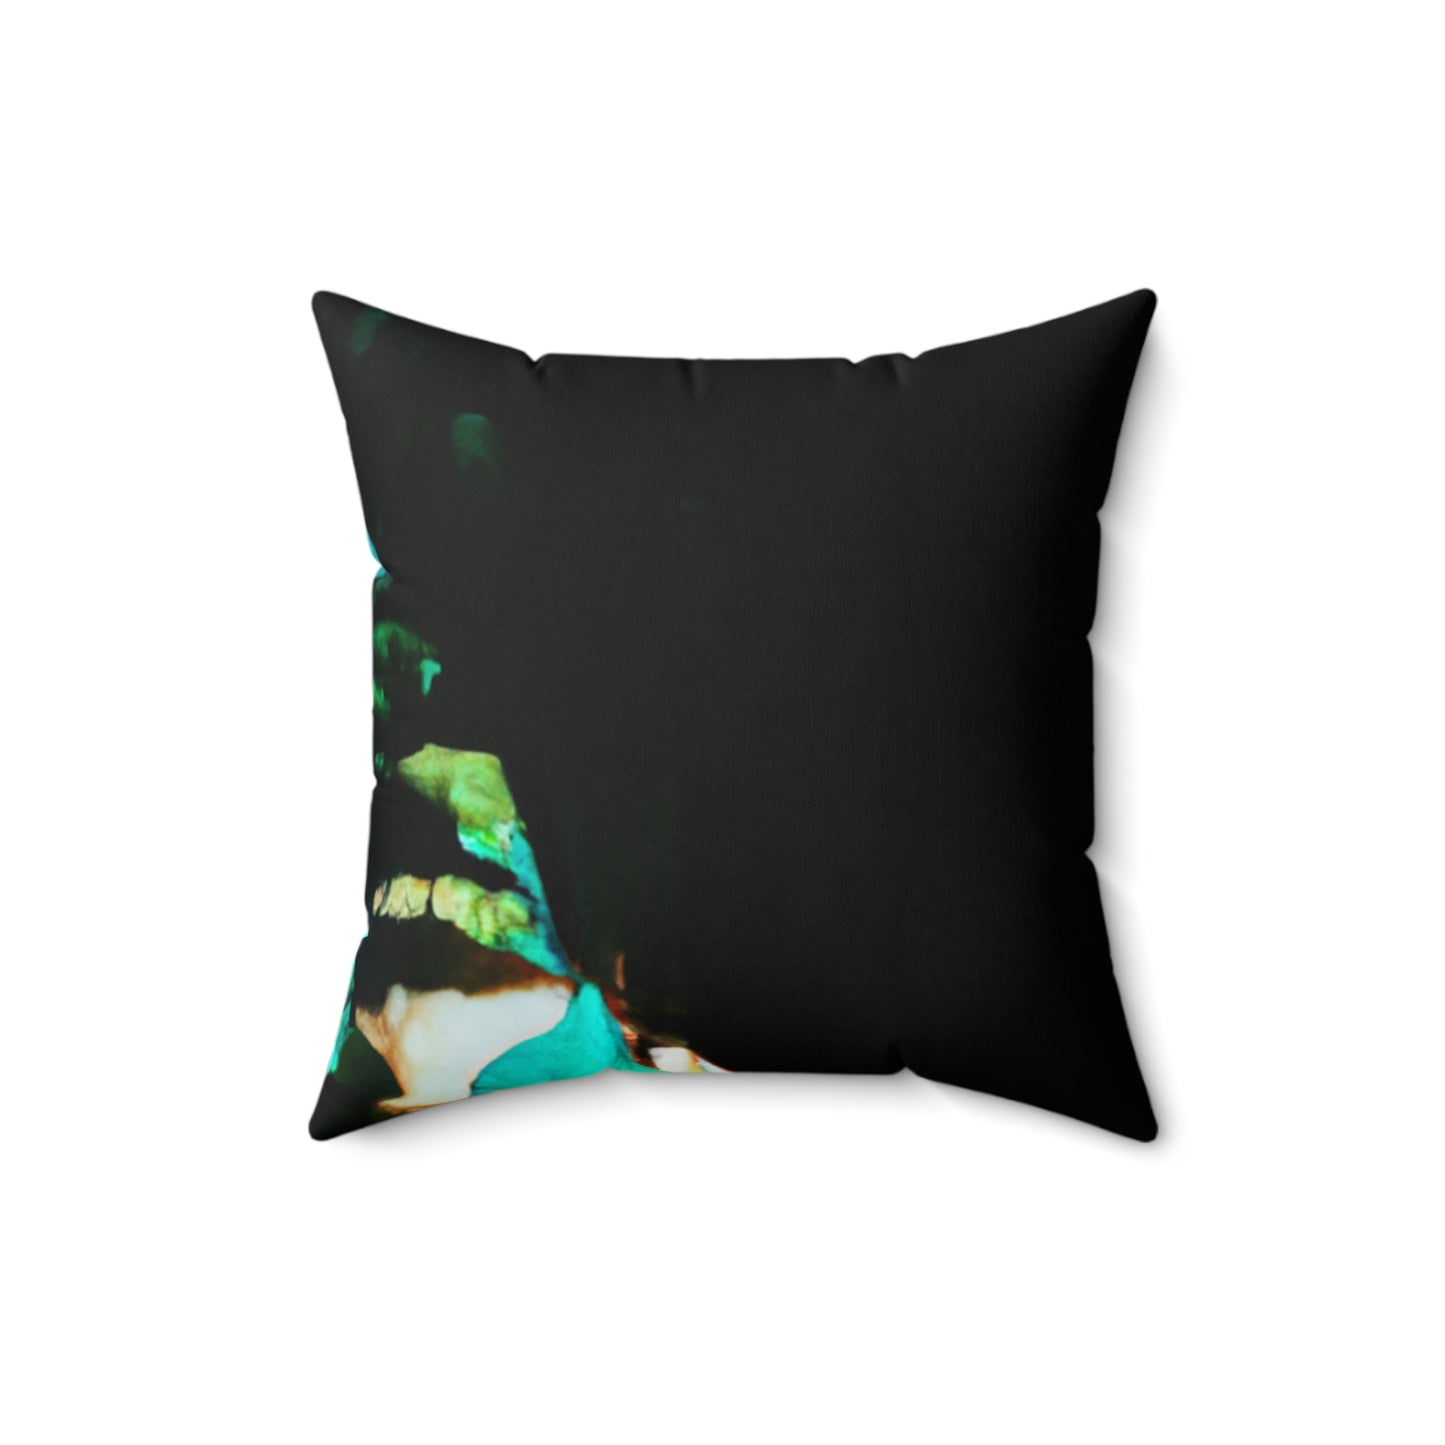 The Gleaming Relic of the Cave - The Alien Square Pillow